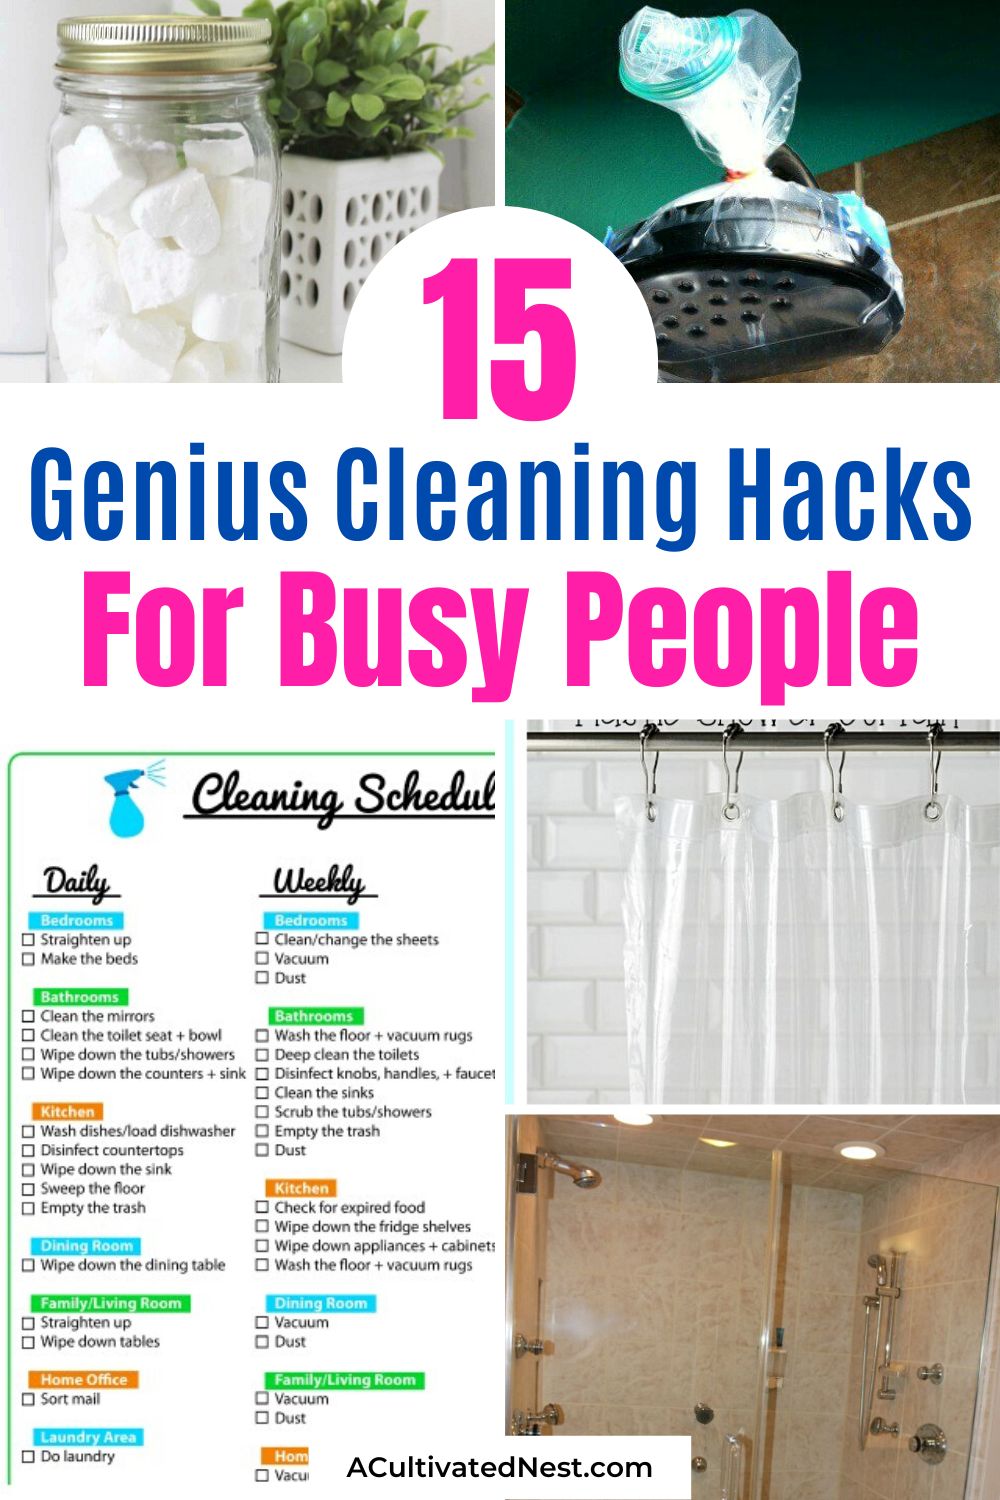 The 15 Best Bathroom Cleaning Hacks for Busy People- Get your home's bathrooms clean fast and easily with these genius bathroom cleaning hacks! | bathroom cleaning tips, how to keep bathroom clean with boys, #cleaningTips #cleaningHacks #bathroomCleaning #cleaning #ACultivatedNest